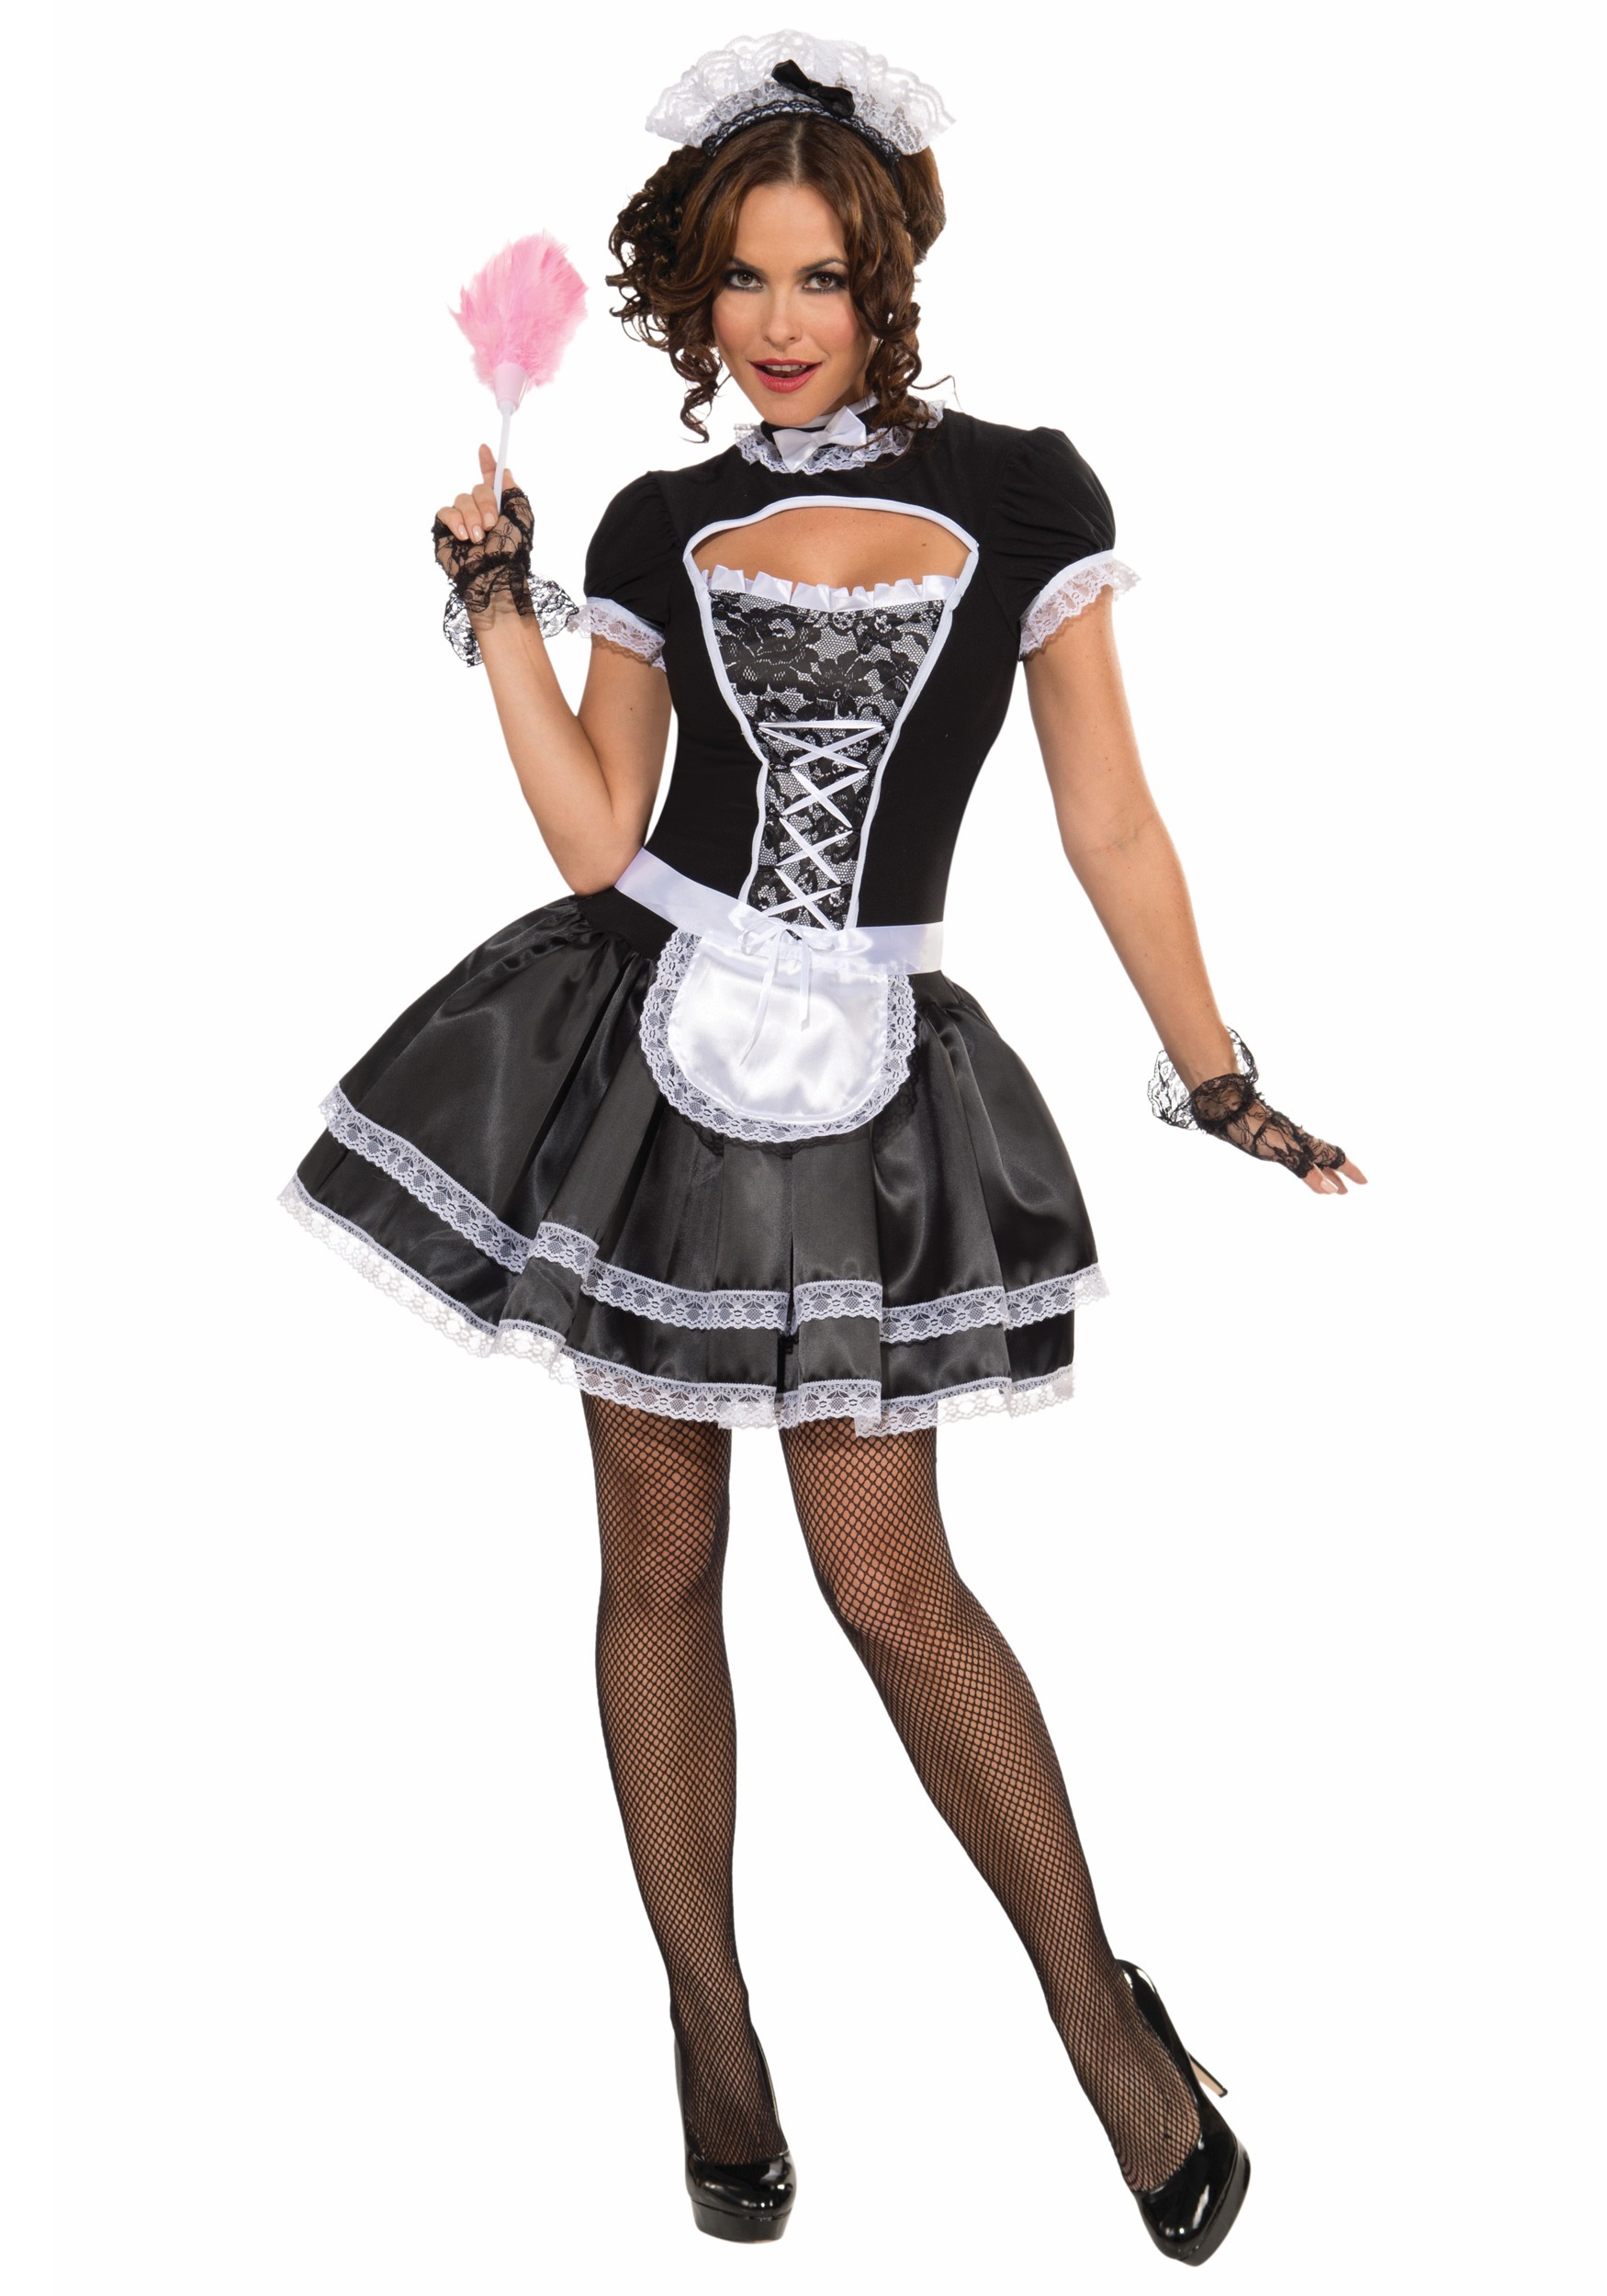 Buy french maid outfit for a man OFF-55